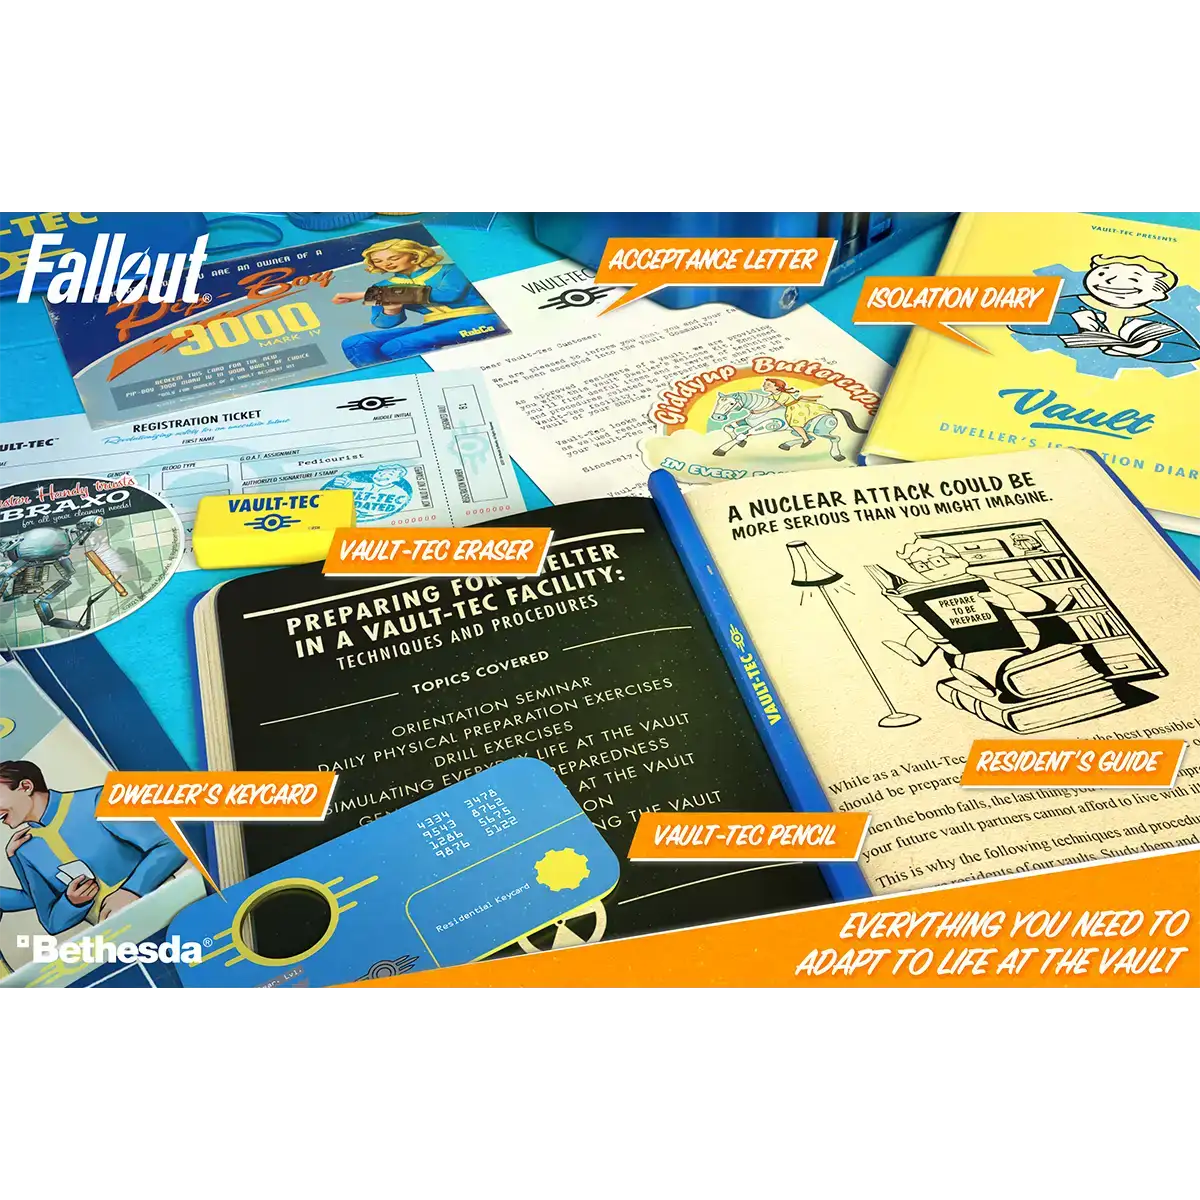 Fallout "Vault Dweller´s Welcome Kit" Image 7